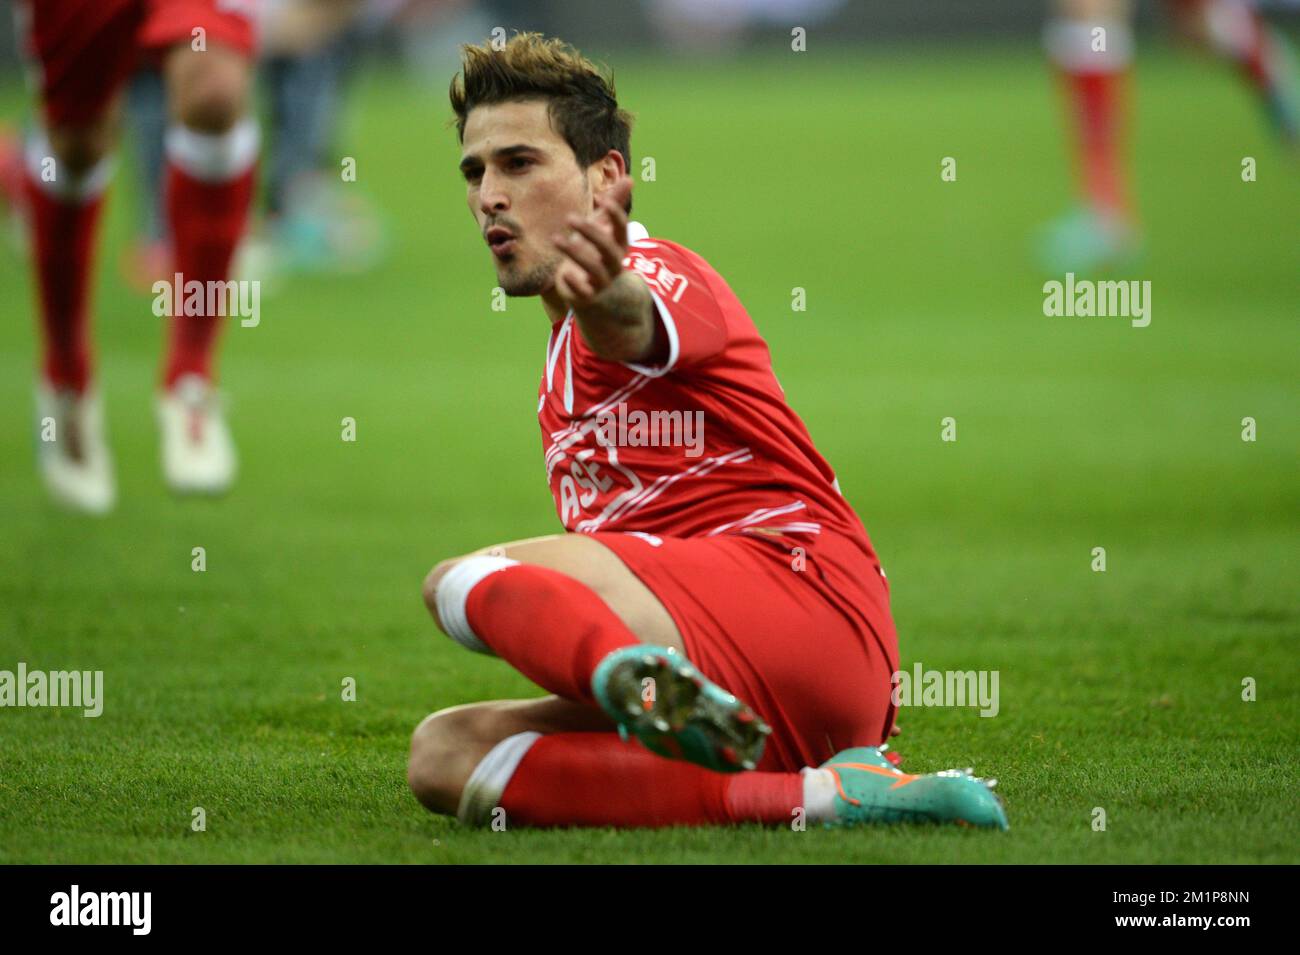 20121207 - LIEGE, BELGIUM: Standard's Maor Bar Buzaglo celebrates after scoring the 3-0 goal during the Jupiler Pro League match between Standard and Charleroi, in Liege, Friday 07 December 2012, on day 19 of the Belgian soccer championship. BELGA PHOTO YORICK JANSENS Stock Photo